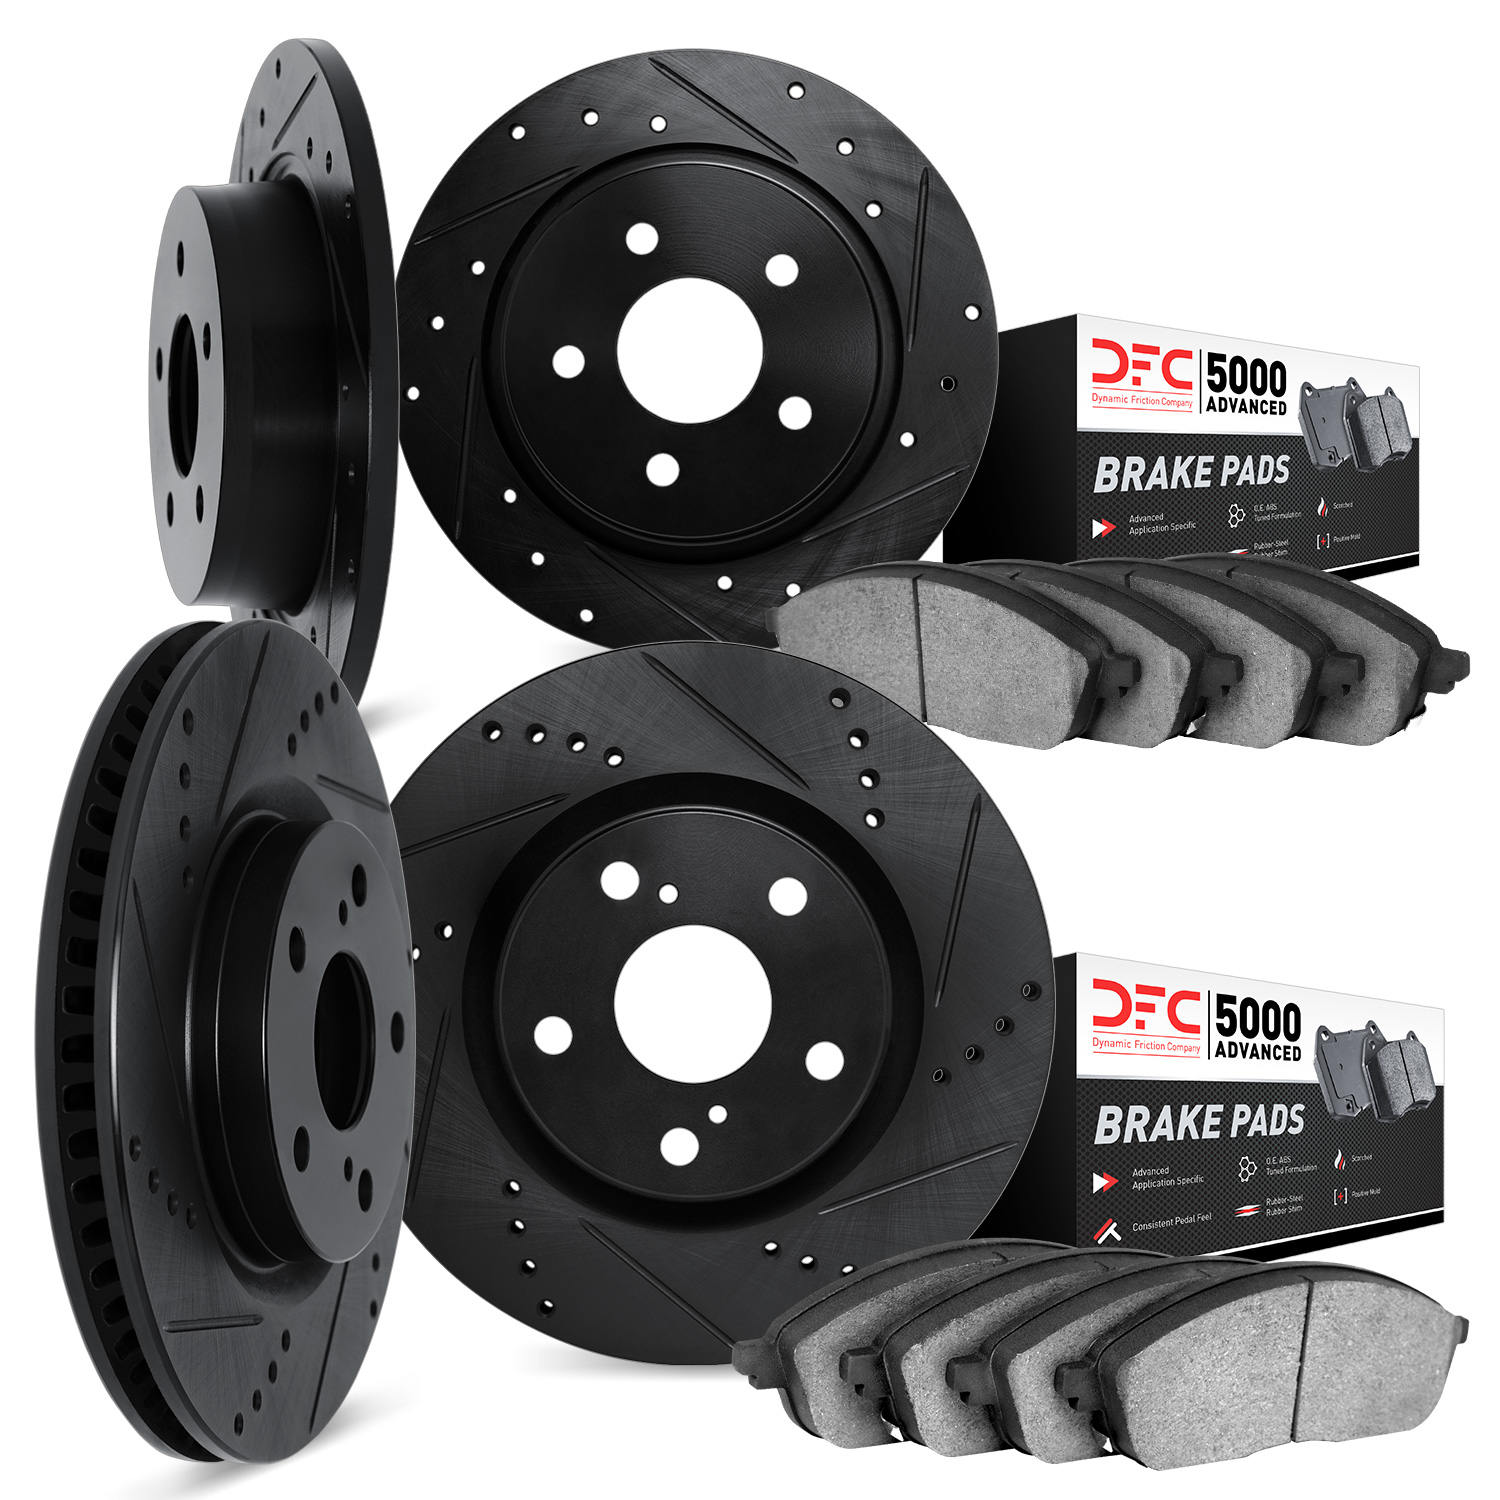 8504-47254 Drilled/Slotted Brake Rotors w/5000 Advanced Brake Pads Kit [Black], 2005-2009 GM, Position: Front and Rear